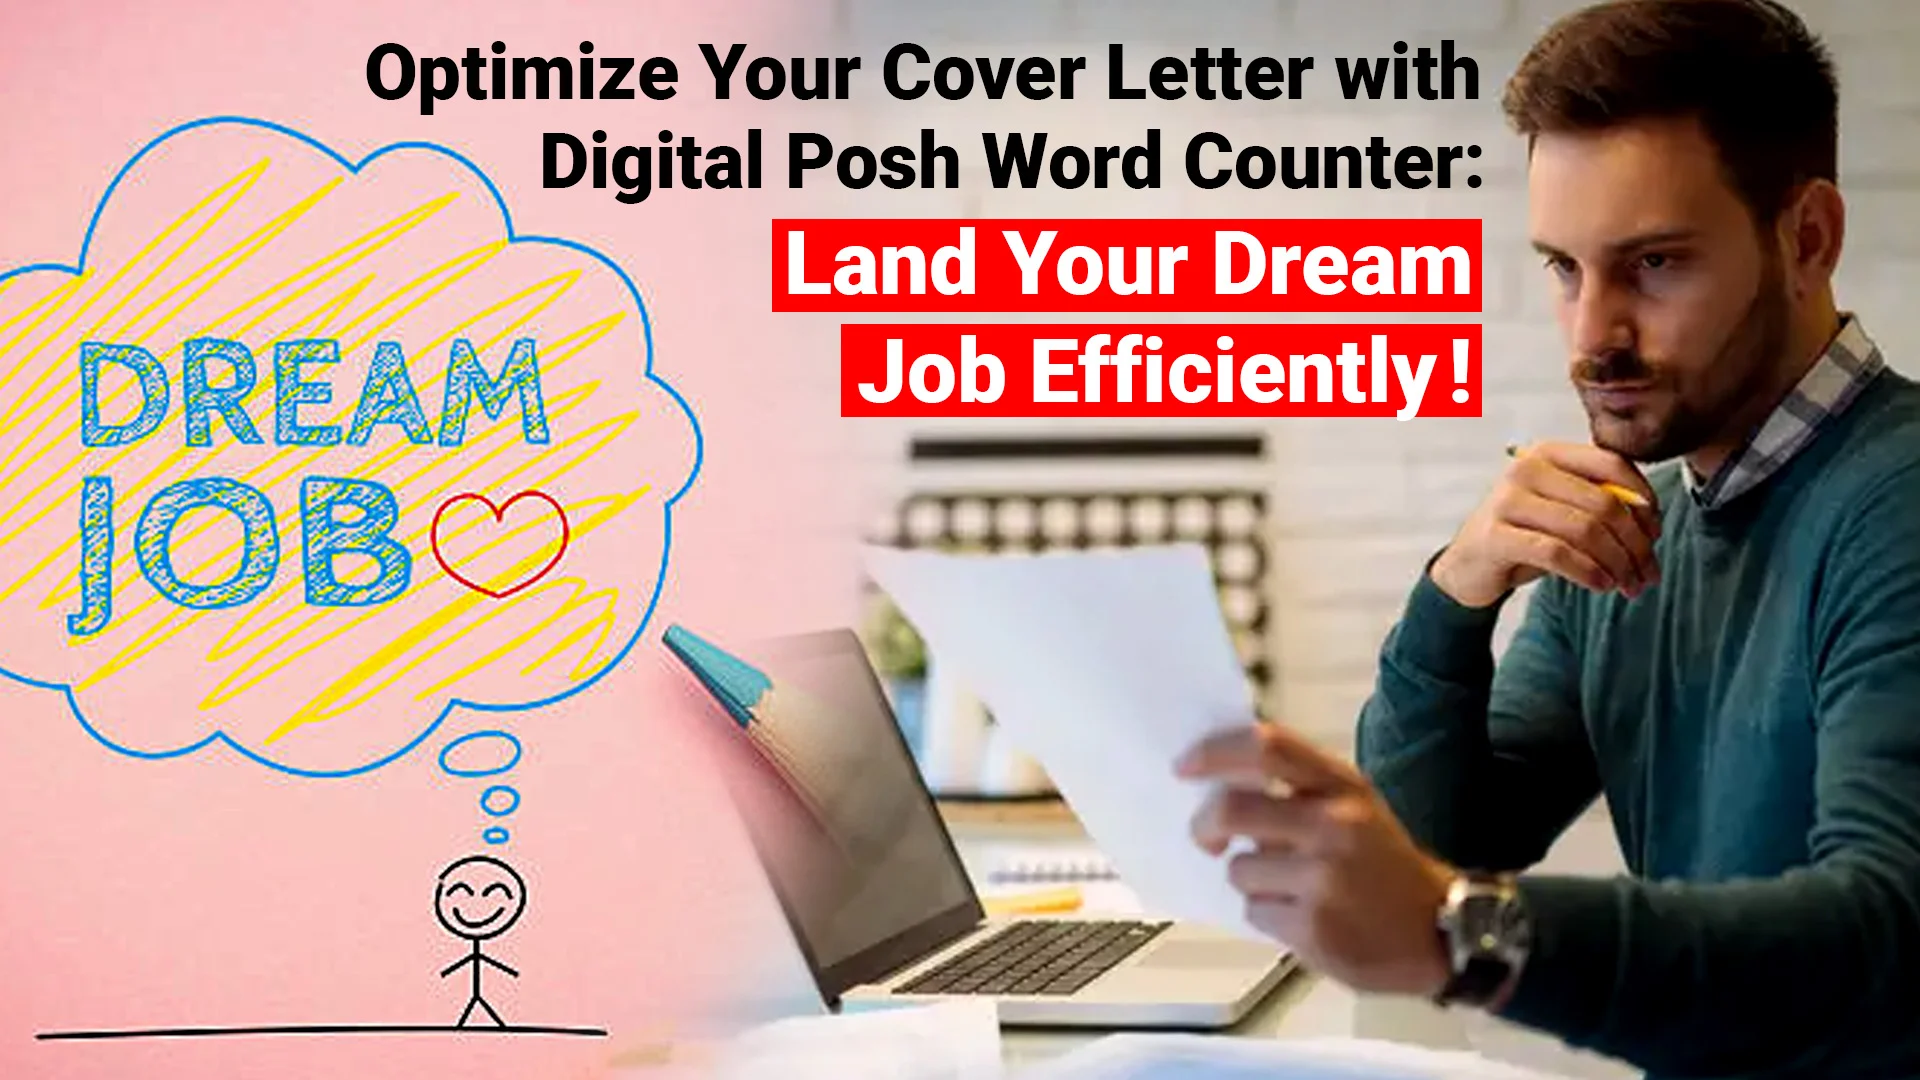 Optimize Your Cover Letter with Digital Posh Word Counter Land Your Dream Job Efficiently!